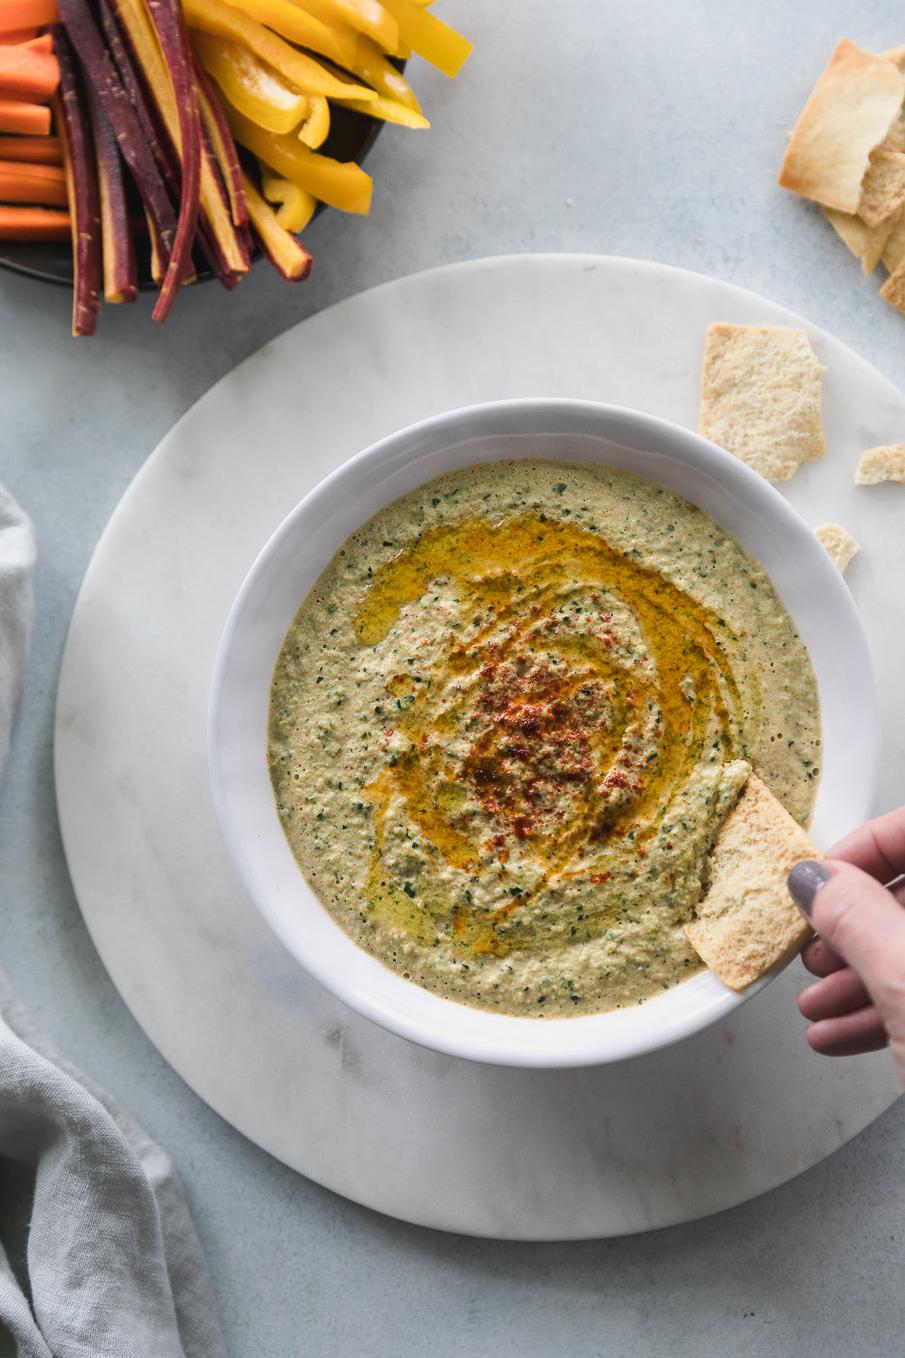  Grilled zucchini takes humble hummus to the next level.